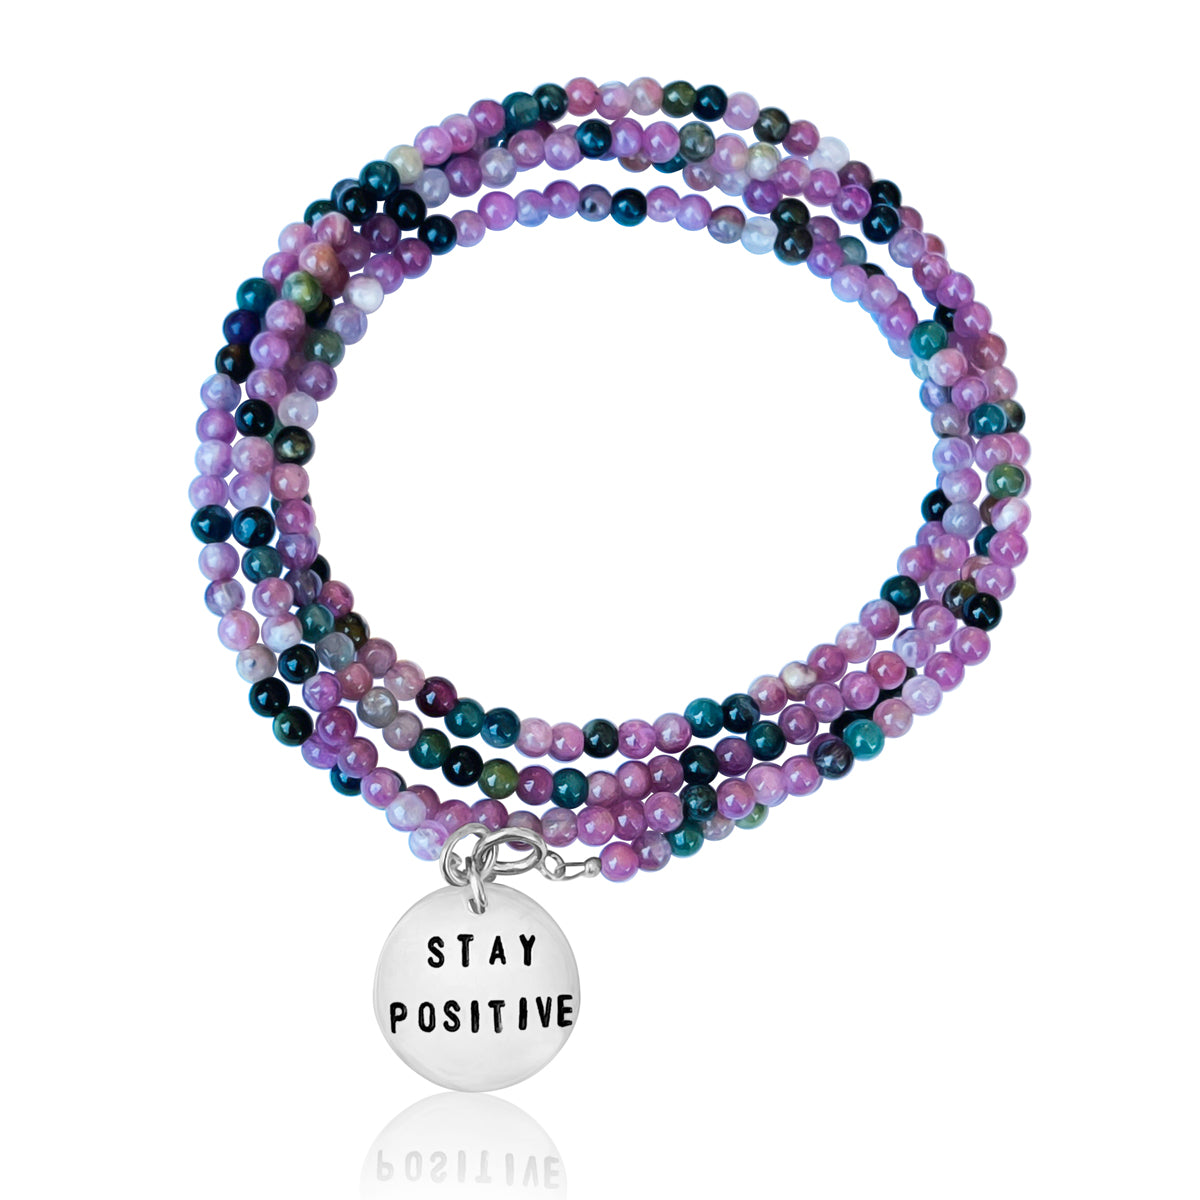 Stay Positive Tourmaline Wrap Bracelet. “The more you feed your mind with positive thoughts, the more you can attract great things into your life.” ― Roy T. Bennett